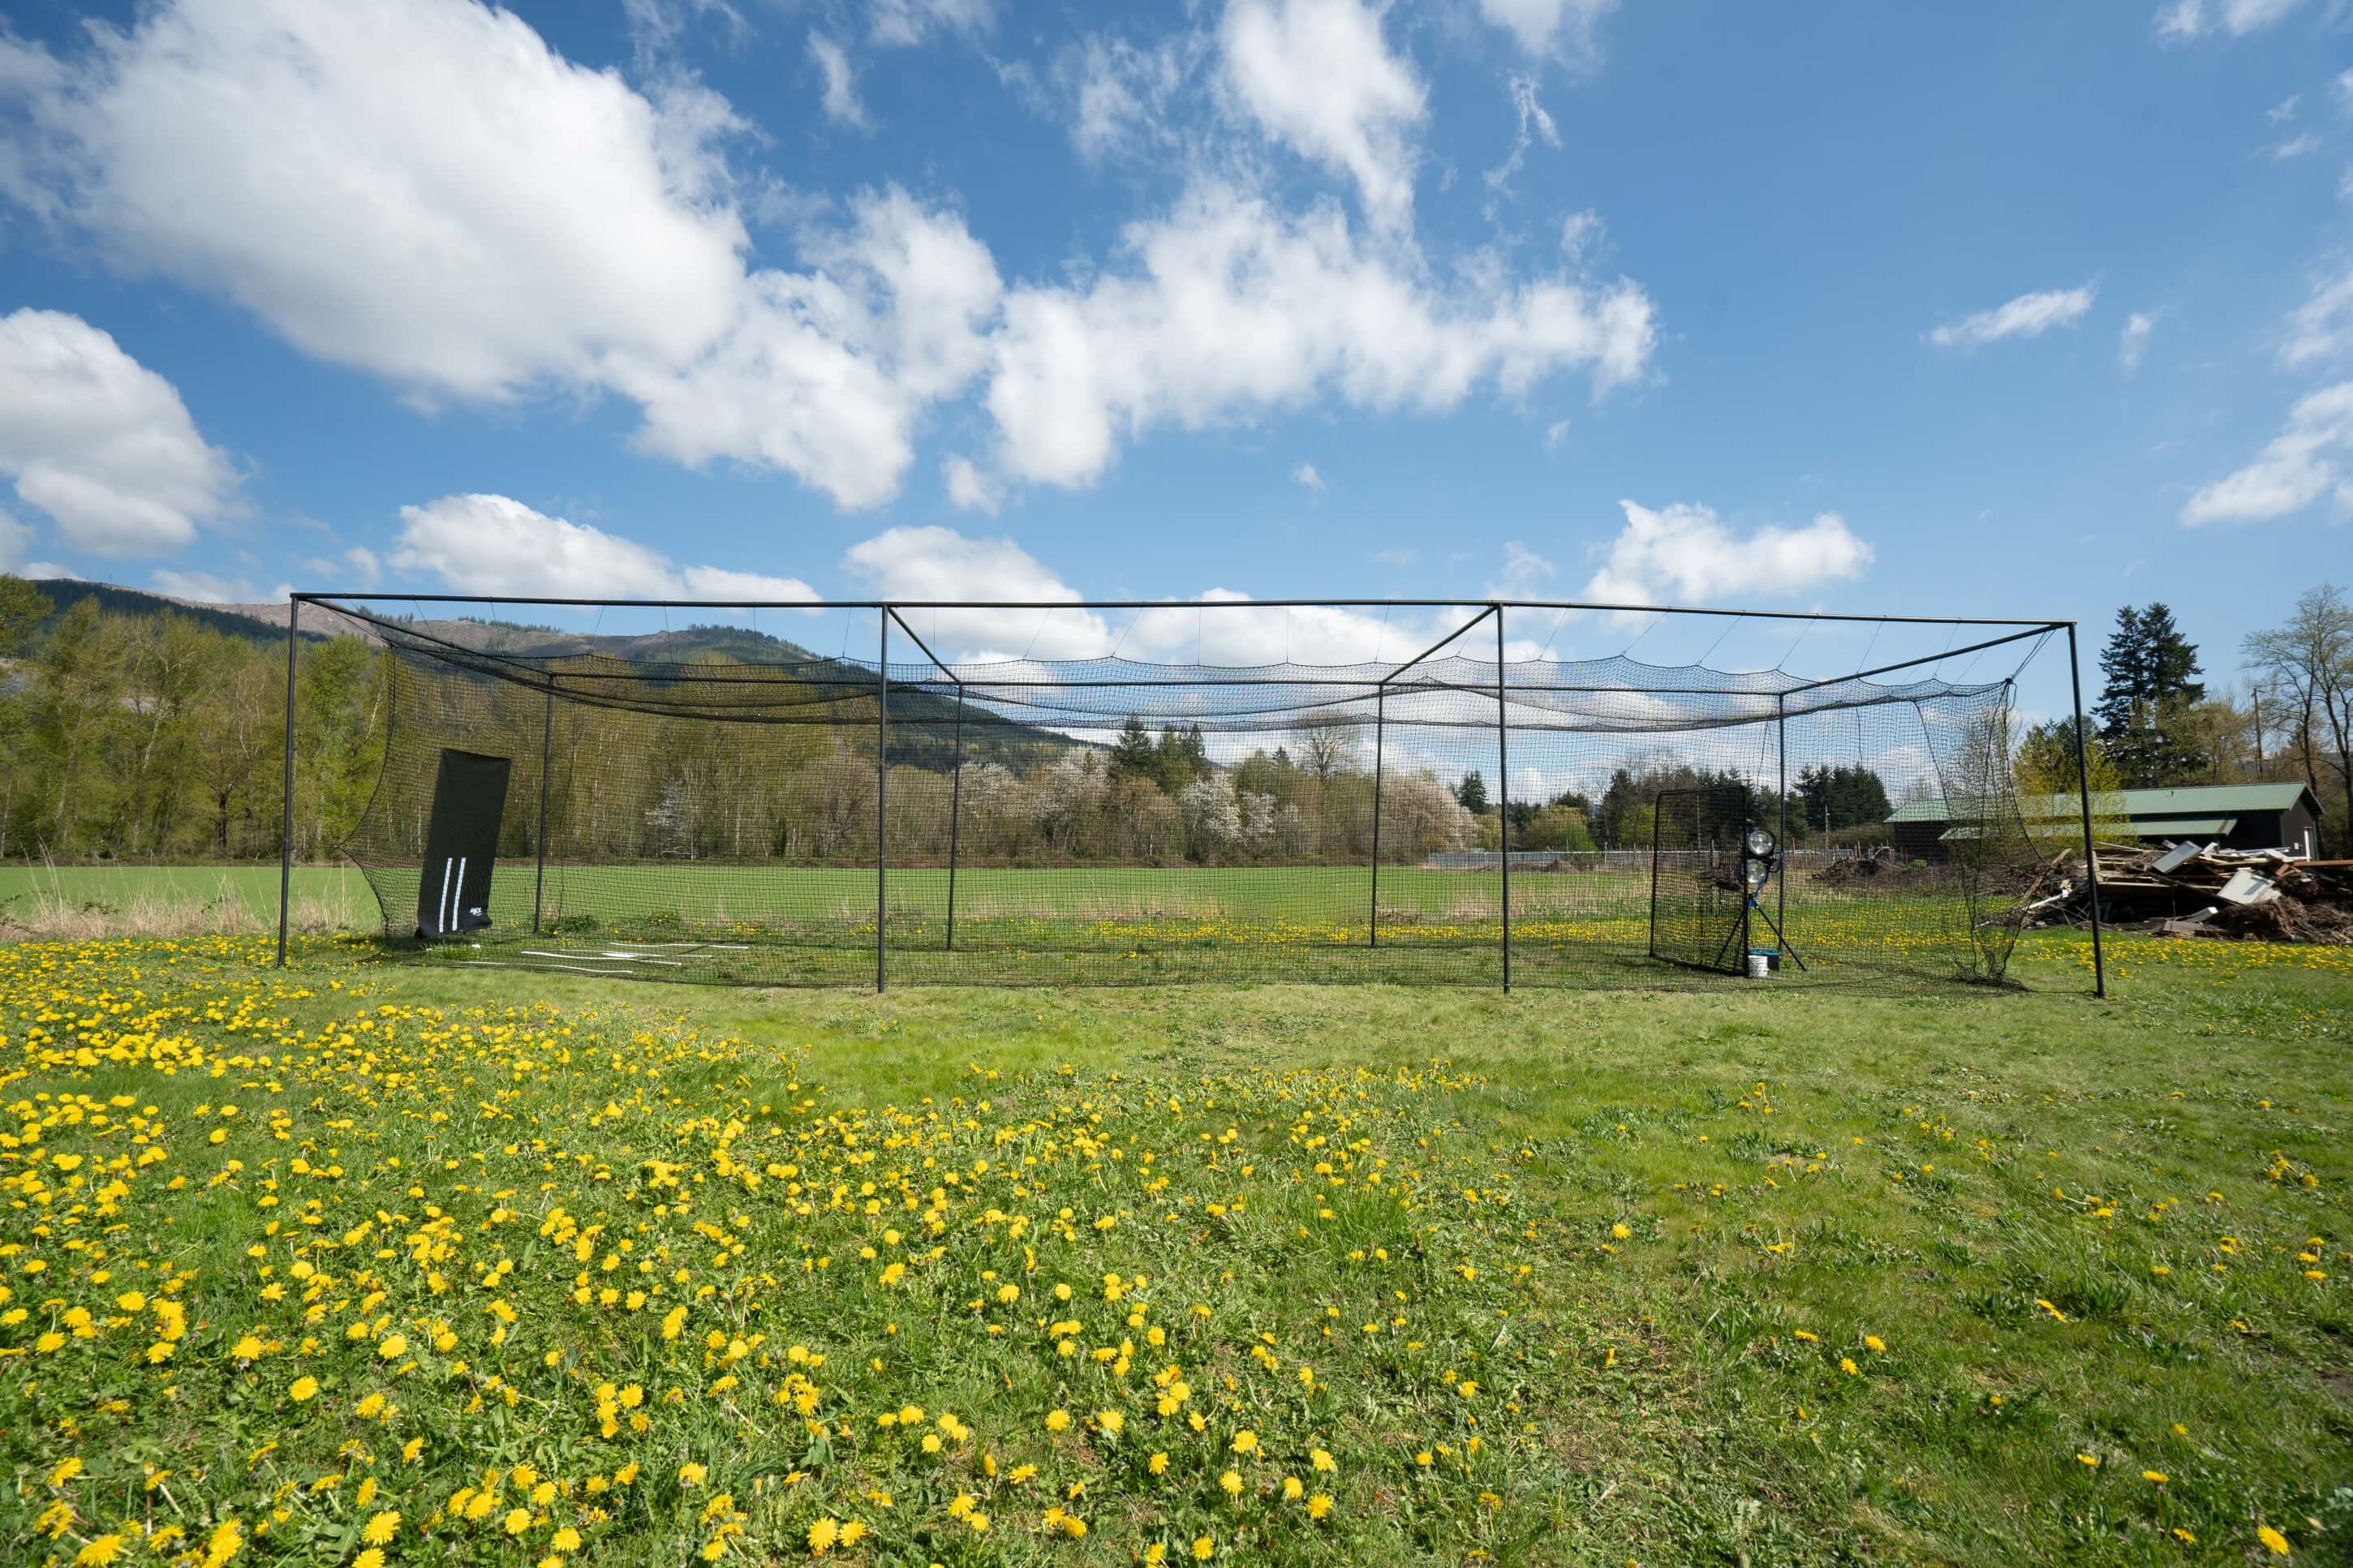 Side of the Thumper batting cage with green grass and blue skies